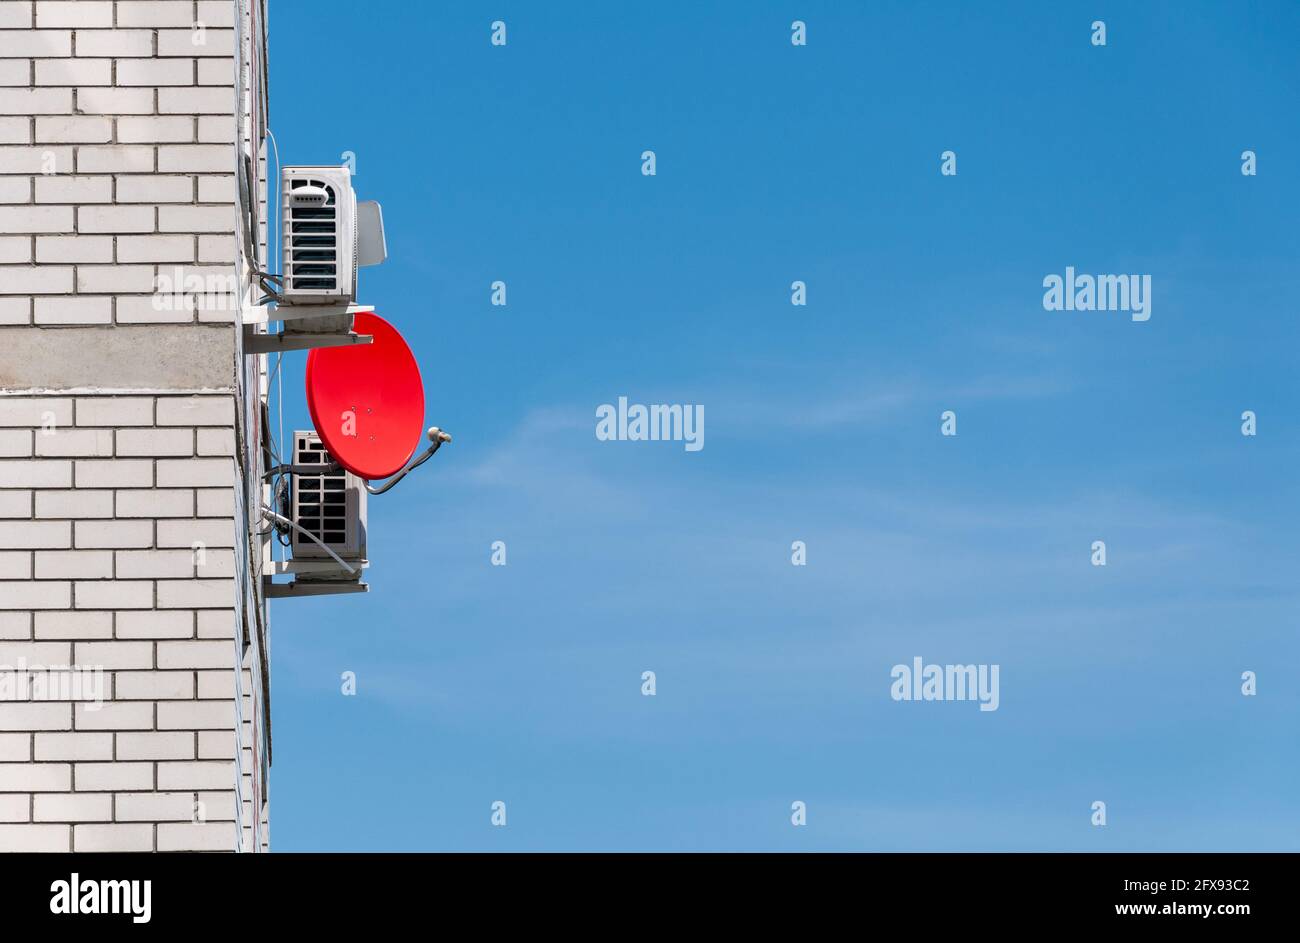 Satellite Dish or radio antennas against blue sky. Satellite dish for watching television are located on the building facade. Wireless technology Stock Photo